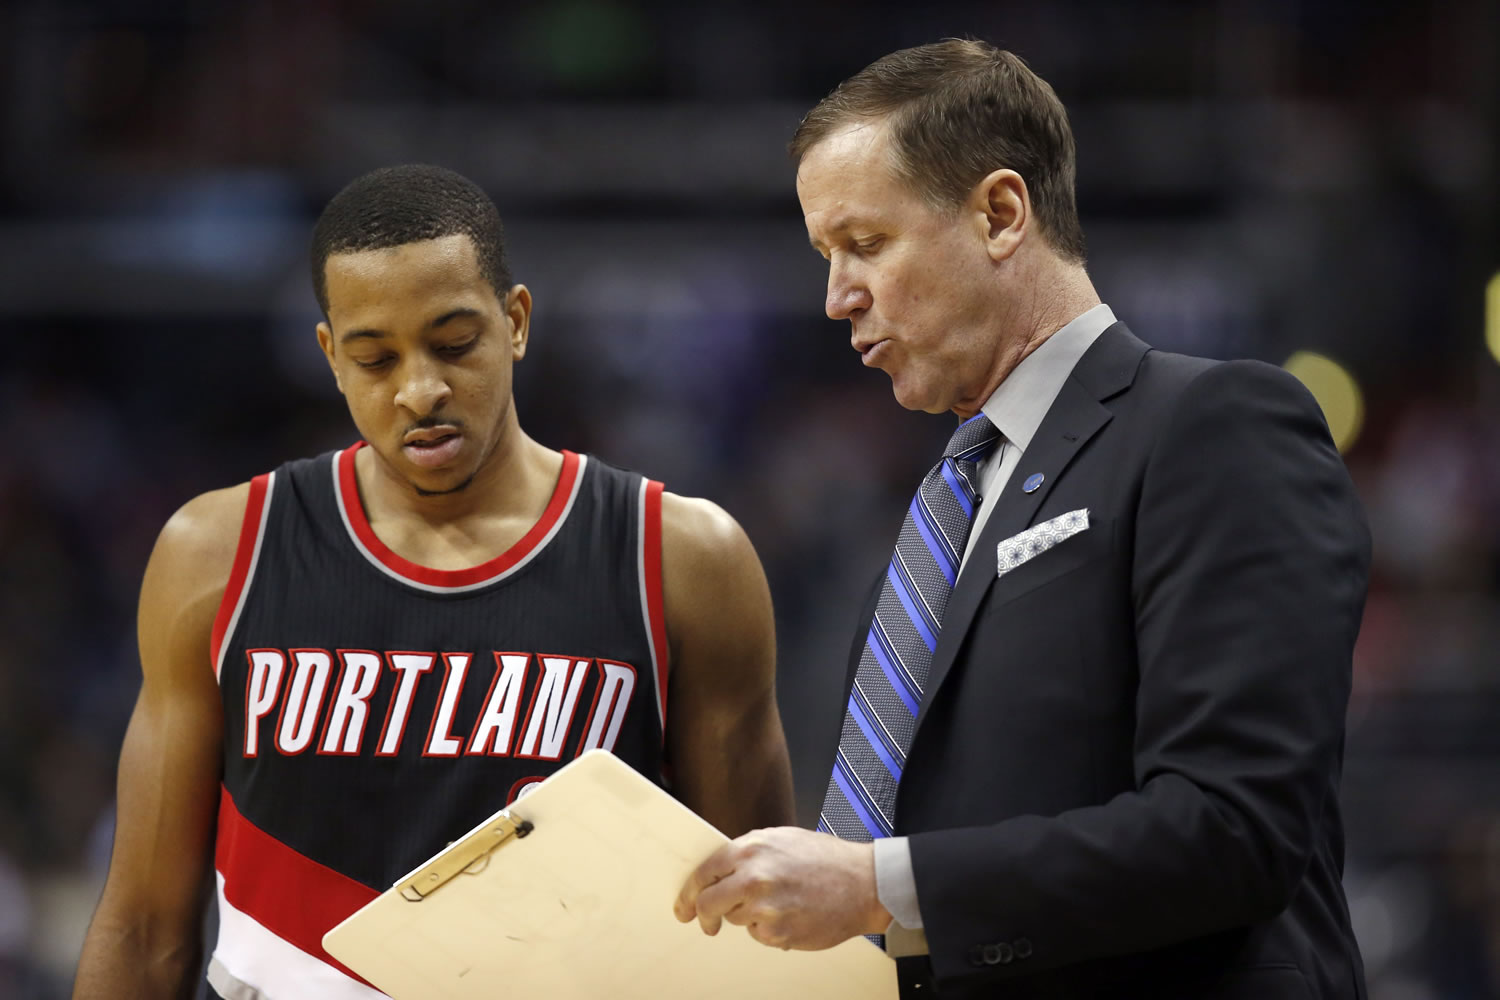 Portland Trail Blazers guard C.J. McCollum (3) watches as head coach Terry Stotts draws a play in the second half of an NBA basketball game against the Washington Wizards, Monday, Jan. 18, 2016, in Washington. The Trail Blazers won 108-98.